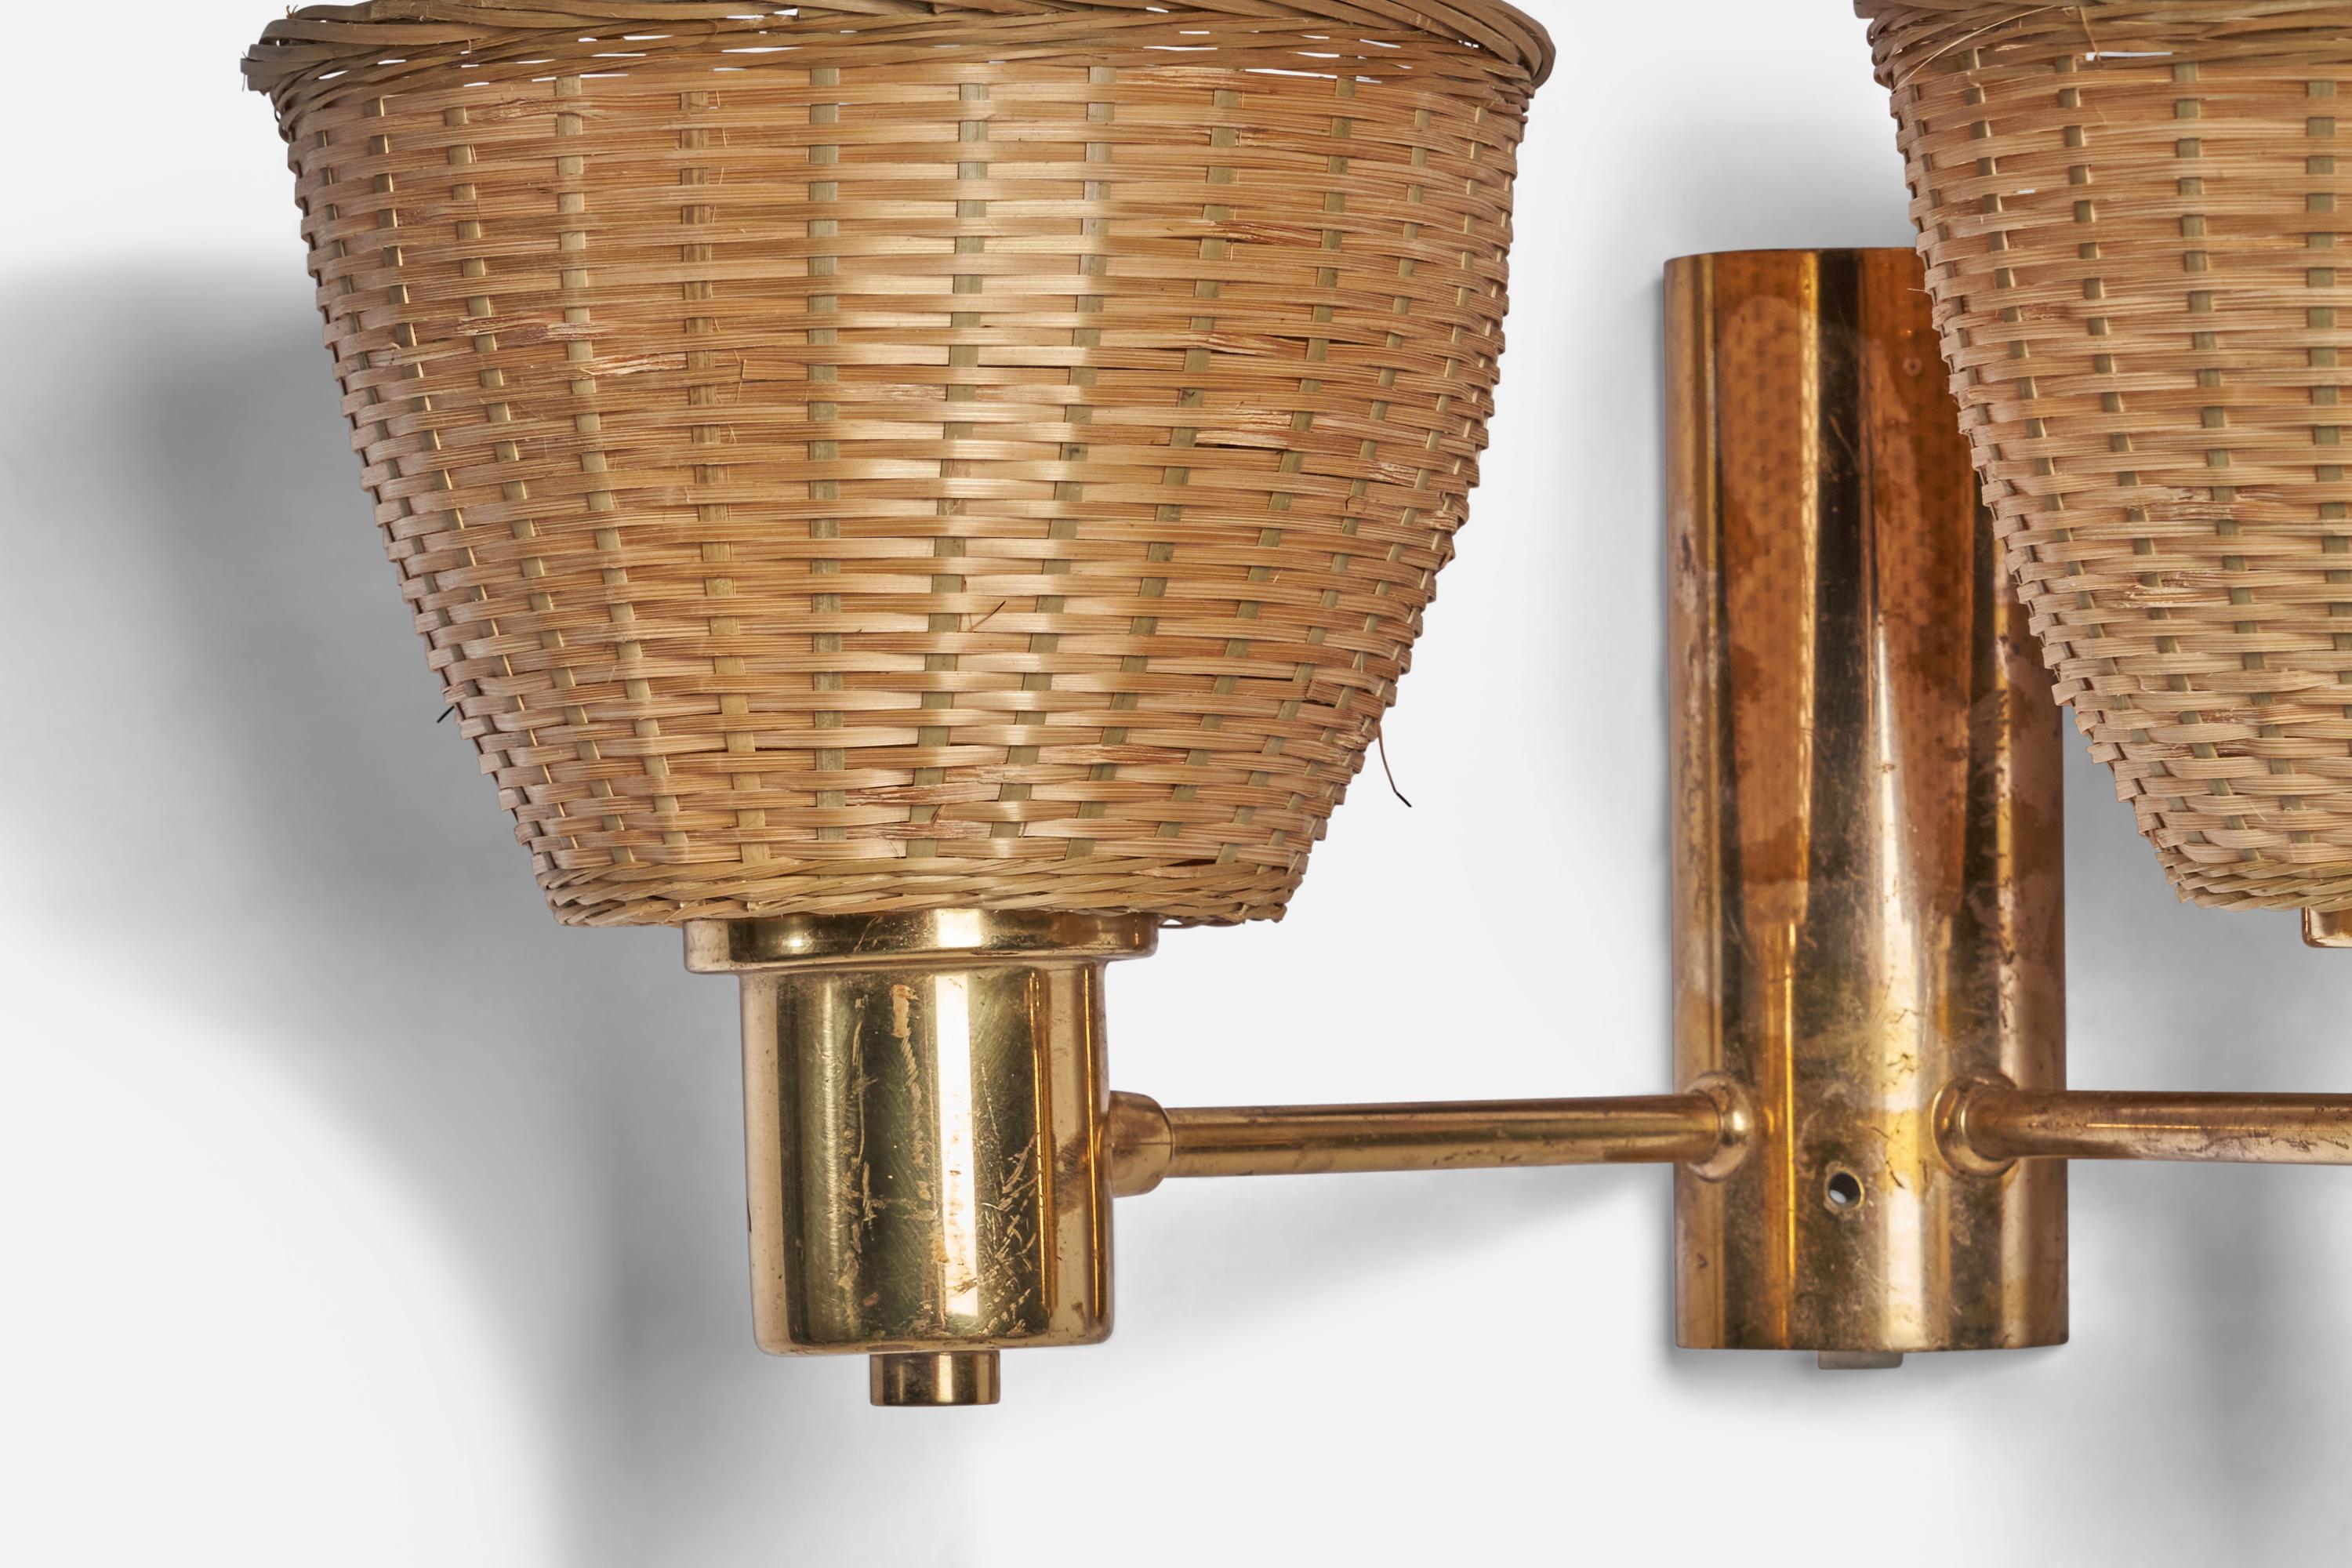 A two-armed brass and rattan wall light designed and produced in Sweden, 1960s.

Overall Dimensions (inches): 8” H x 15” W x 7.5” D
Bulb Specifications: E-26 Bulb
Number of Sockets: 2
All lighting will be converted for US usage. We are unable to